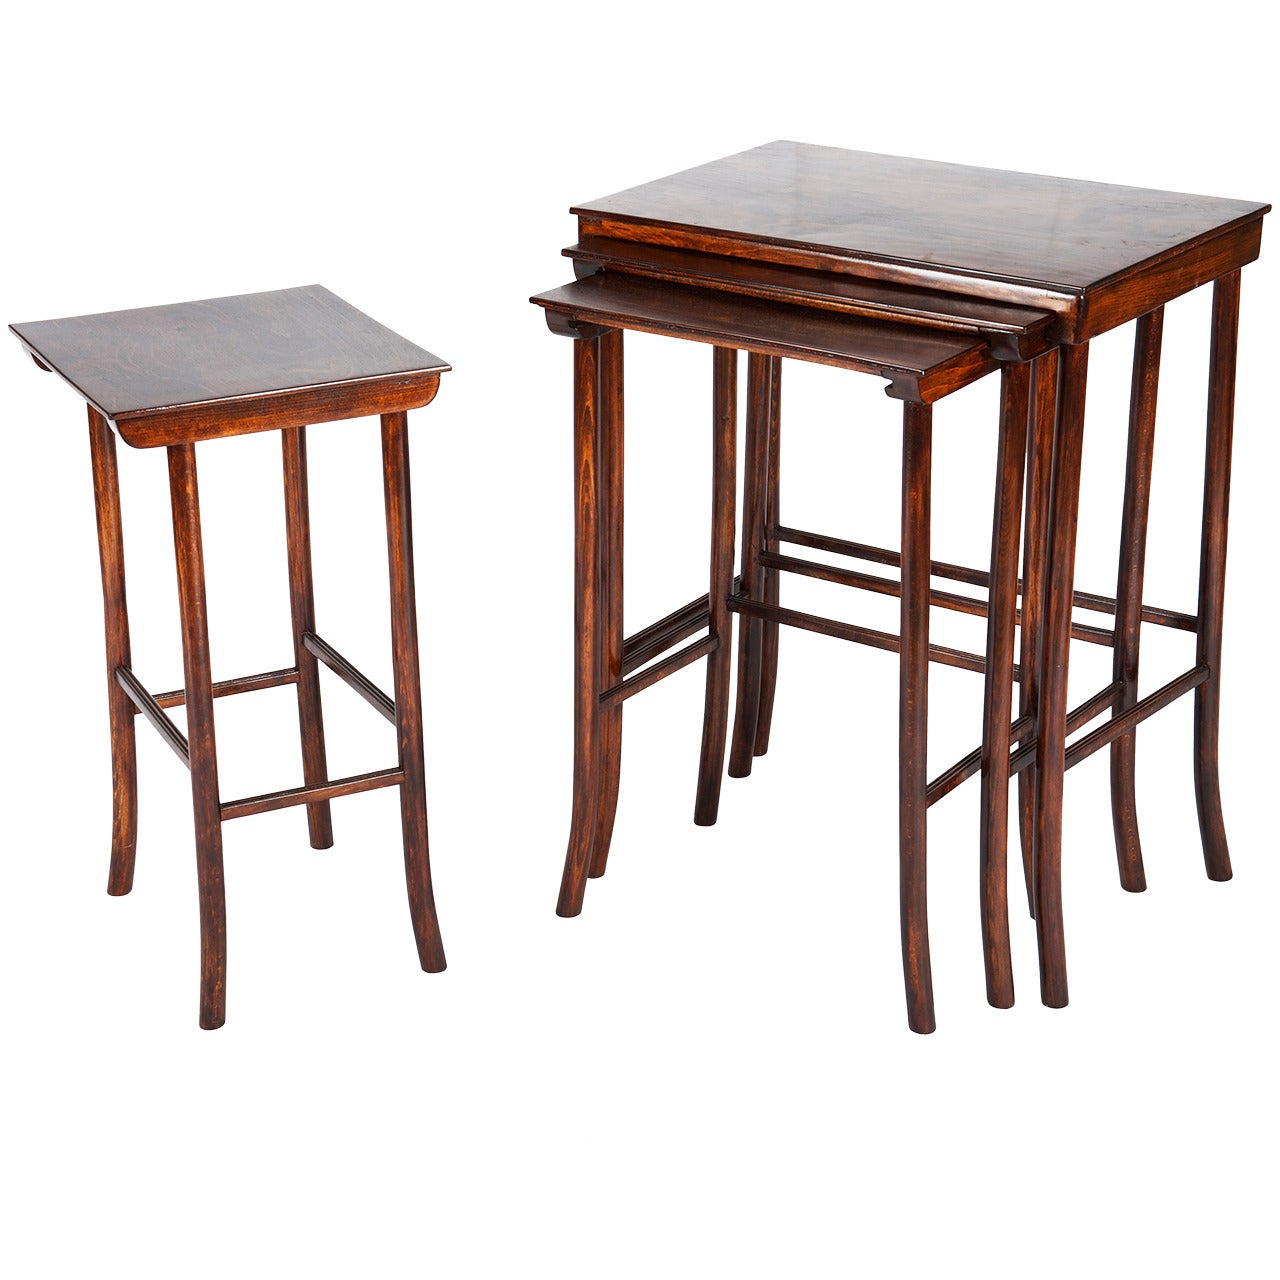 Set of four nesting tables attributed to Thonet